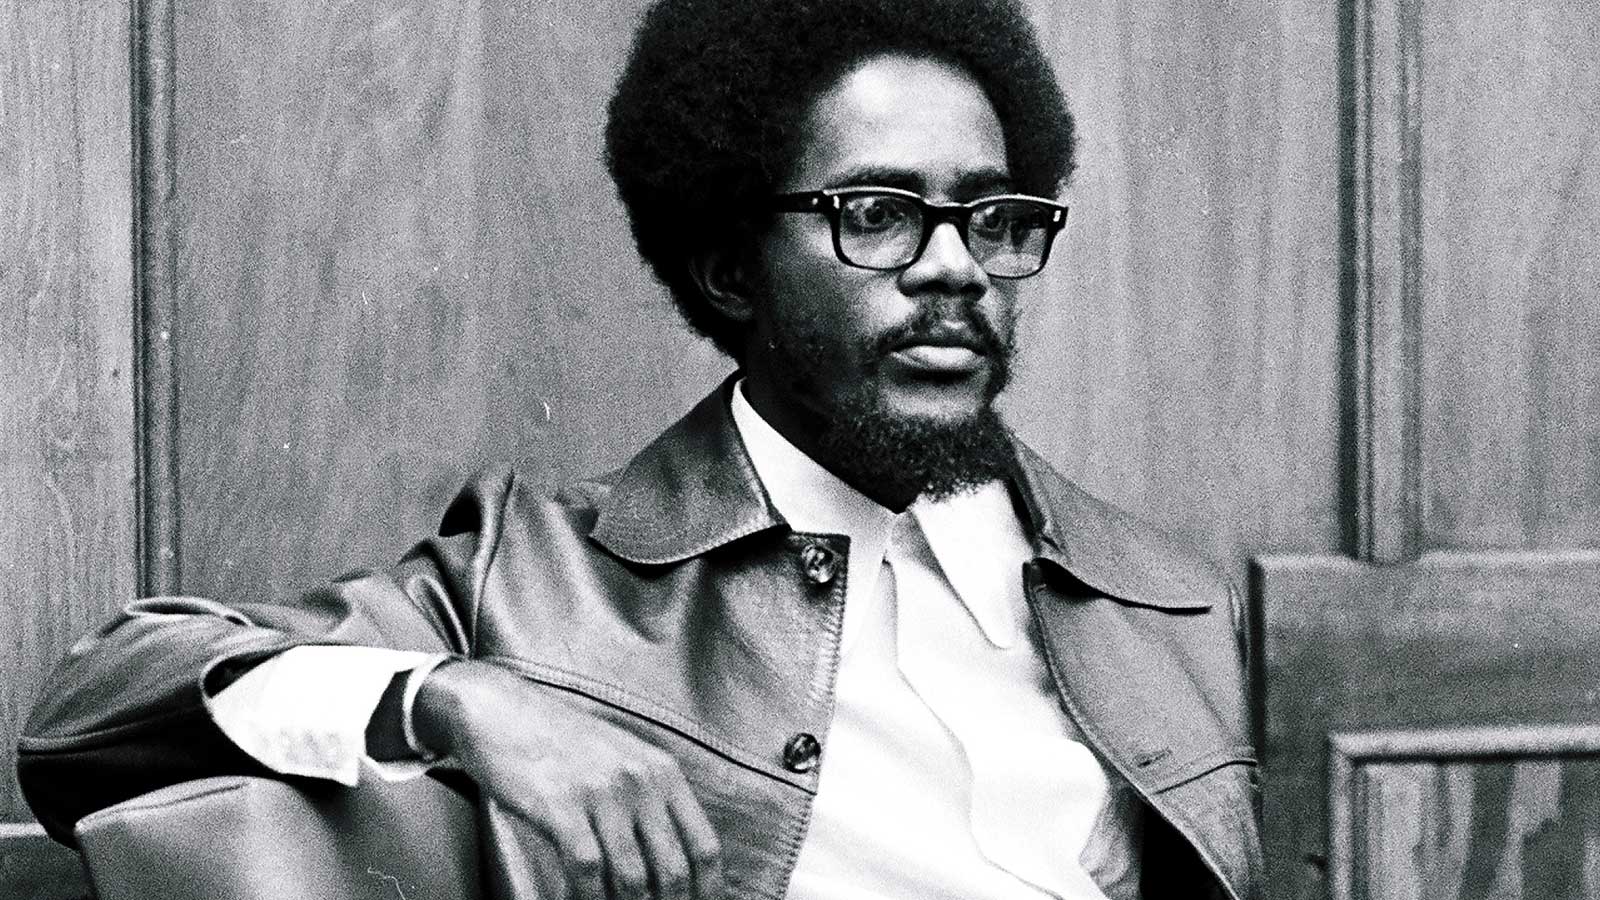 Clearing Walter Rodney’s name